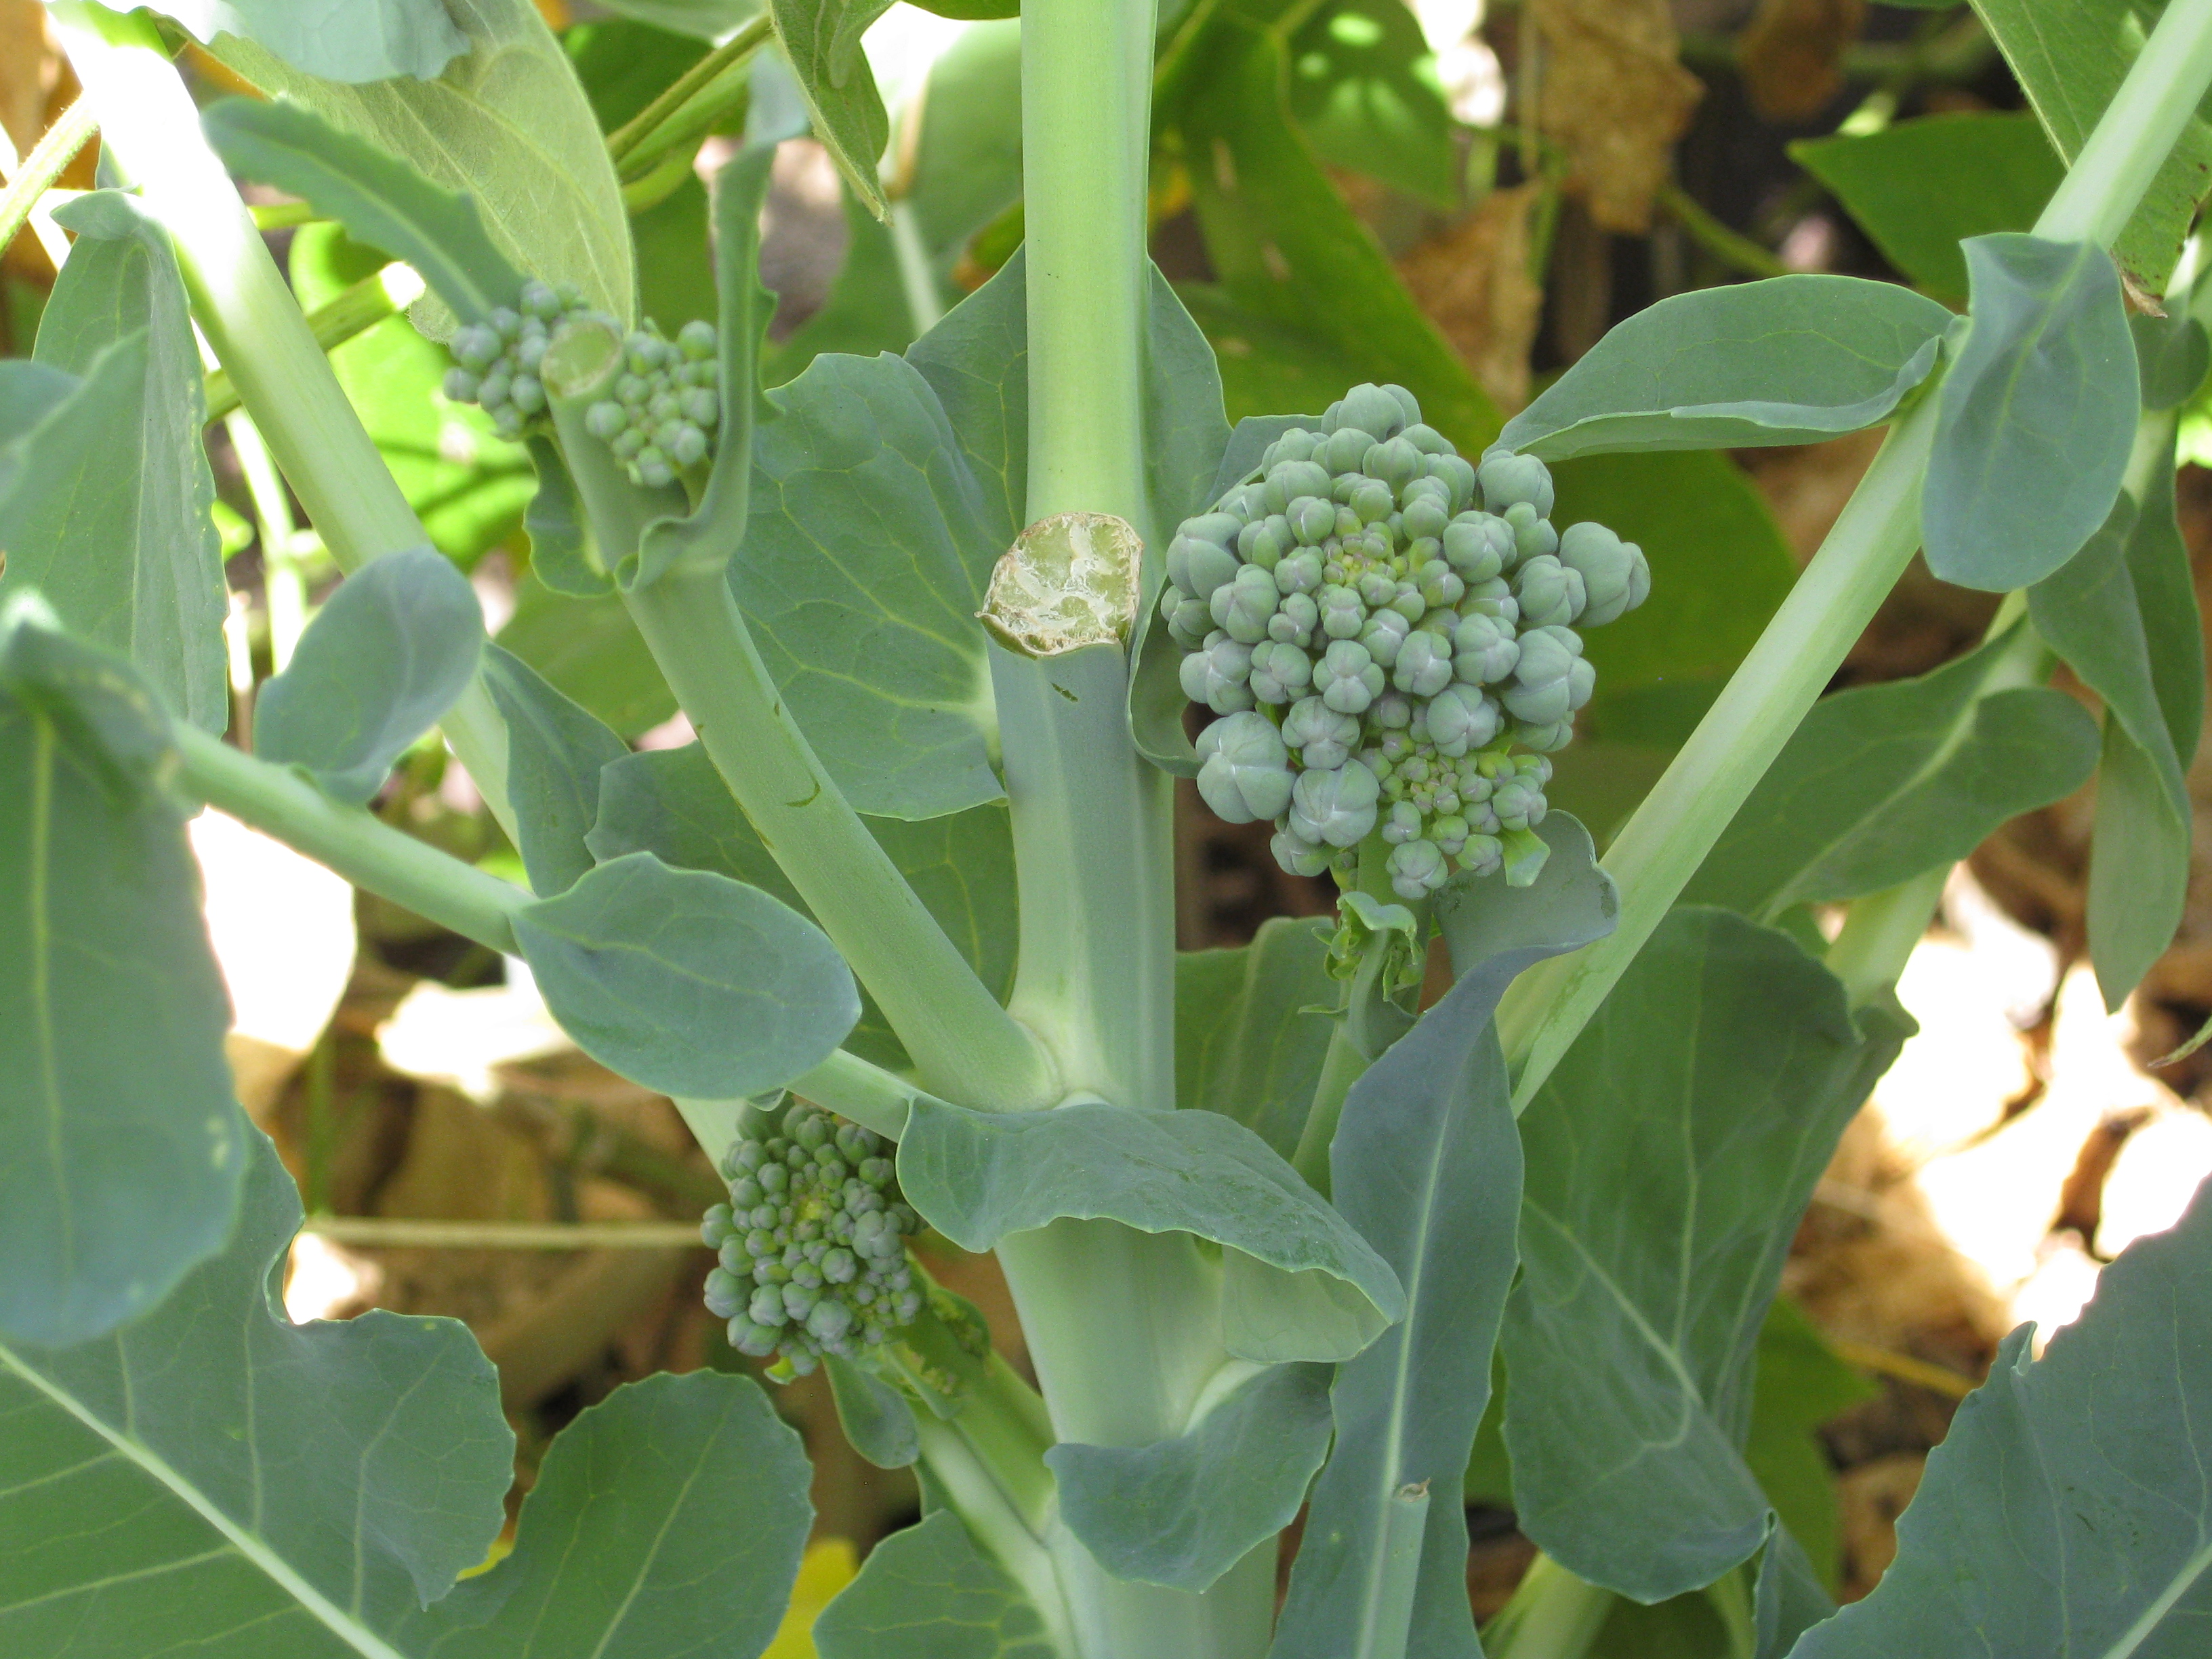 Side shoots form tiny heads of broccoli you can harvest for at least a month.